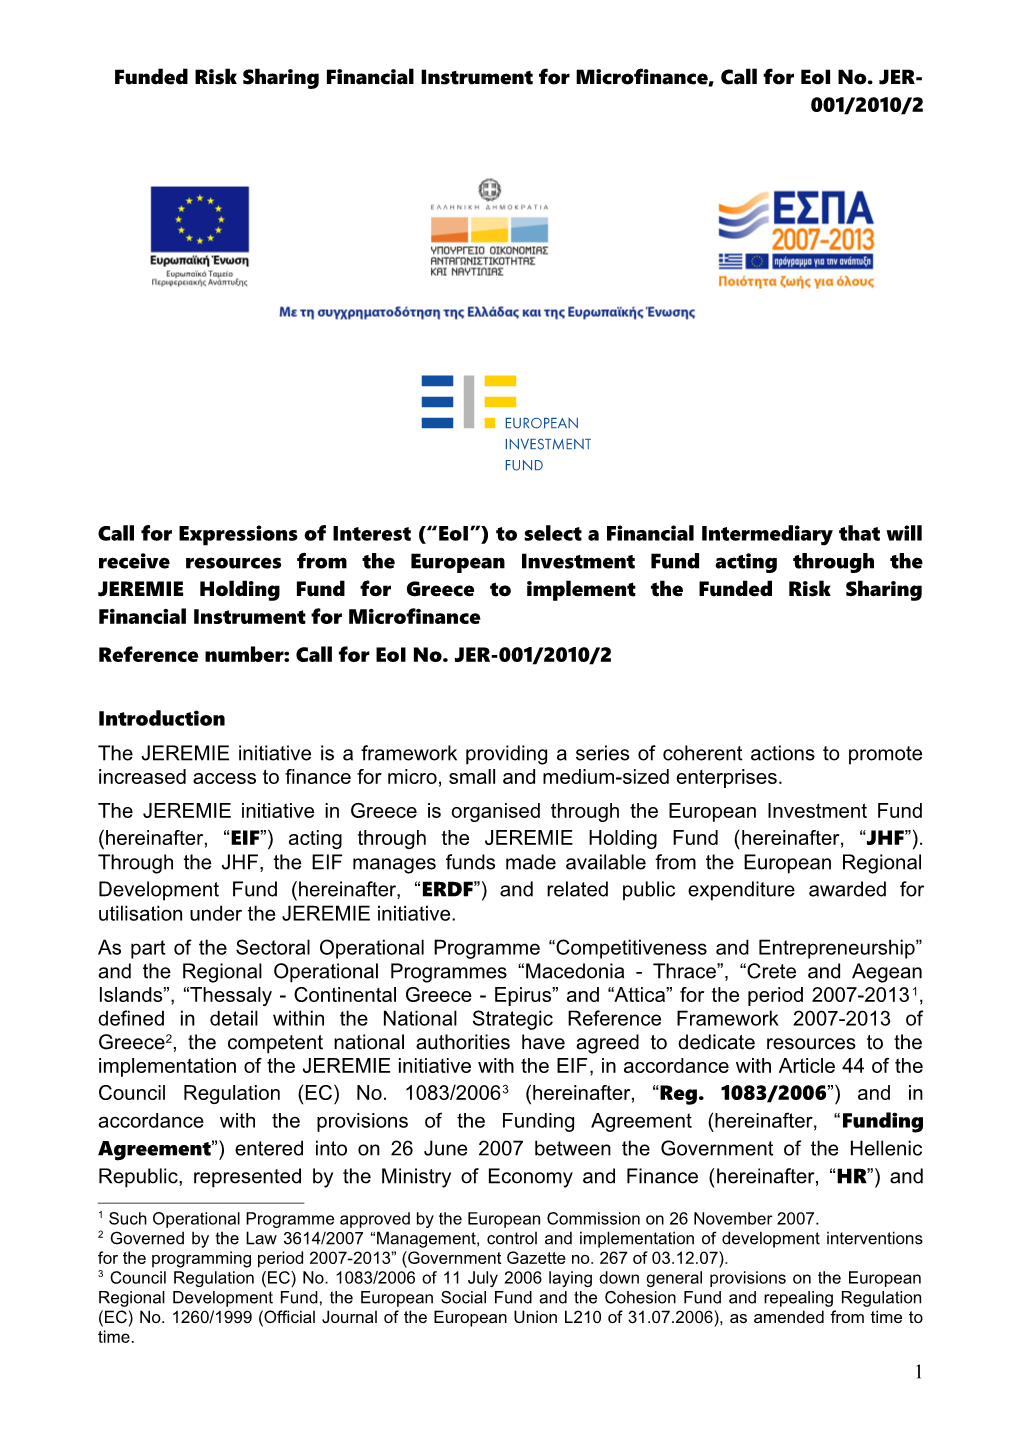 Funded Risk Sharing Financial Instrument Formicrofinance, Call for Eoi No.JER-001/2010/2